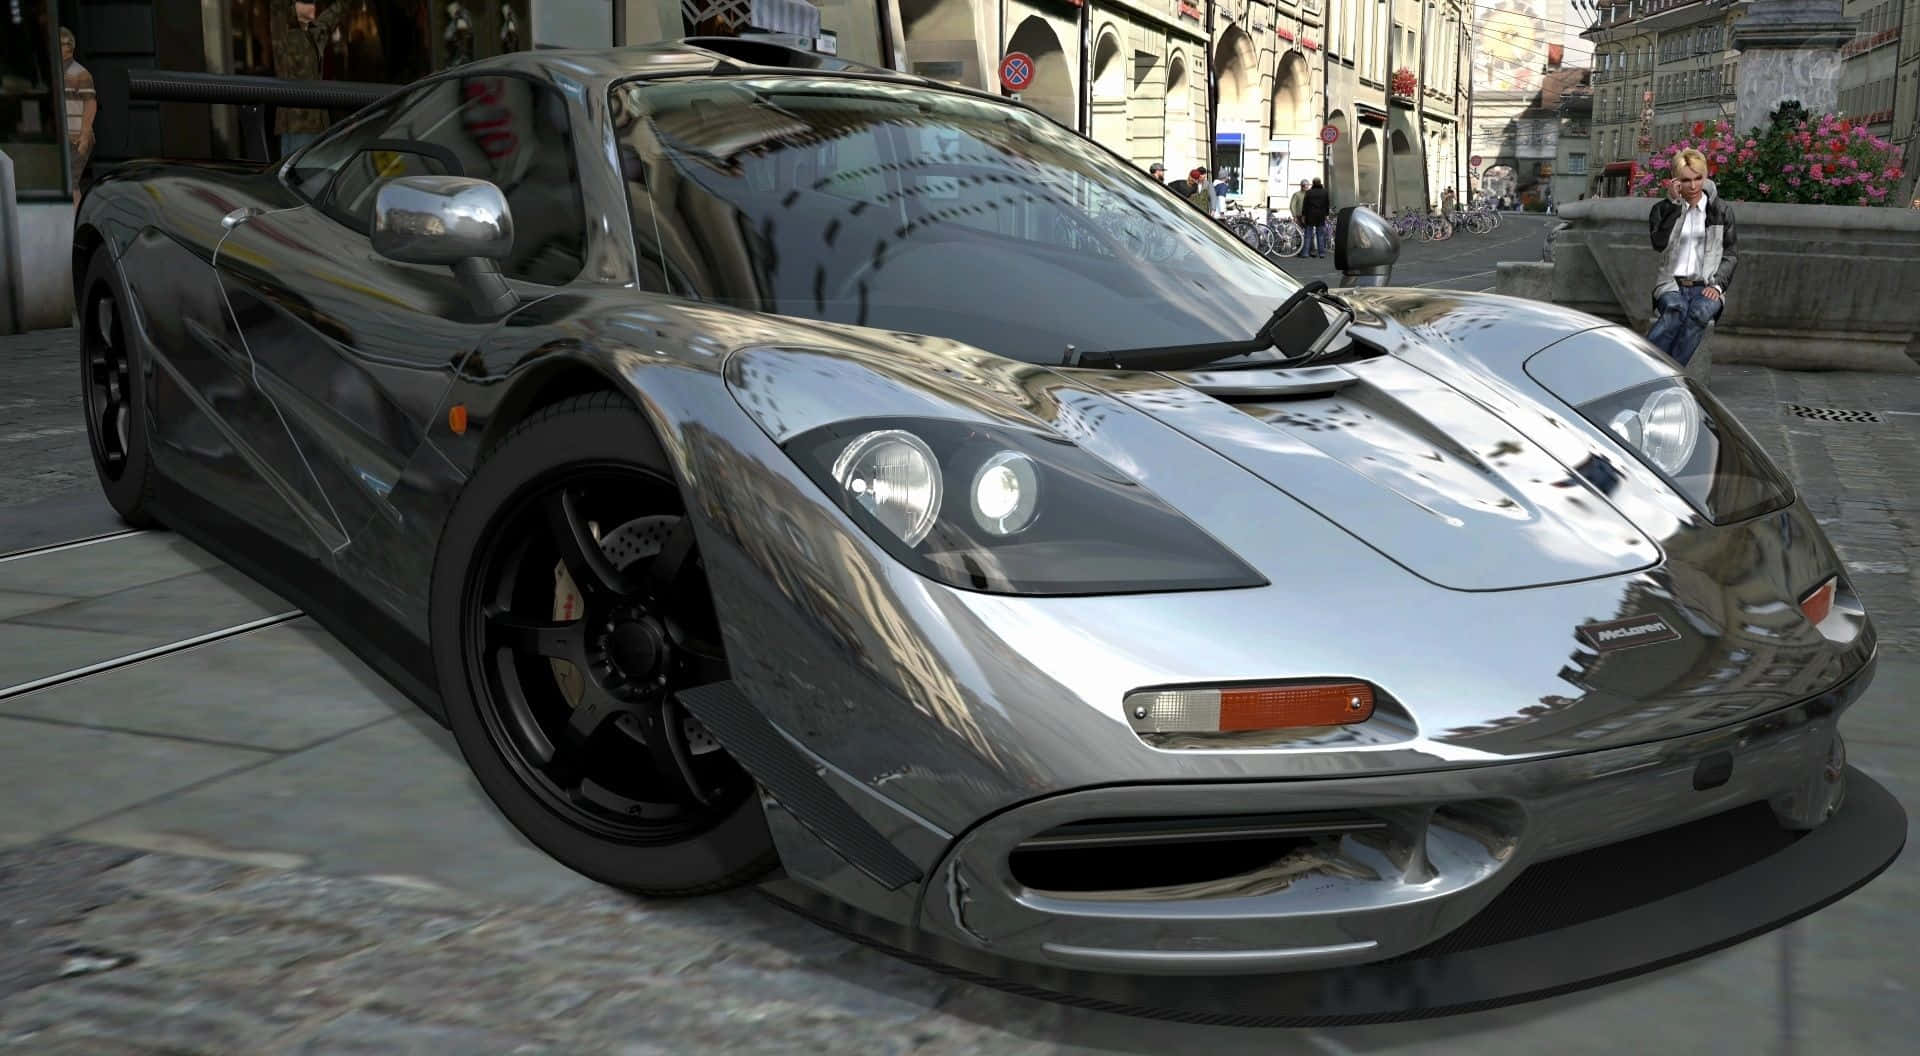 The Iconic McLaren F1 Sports Car in Action Wallpaper